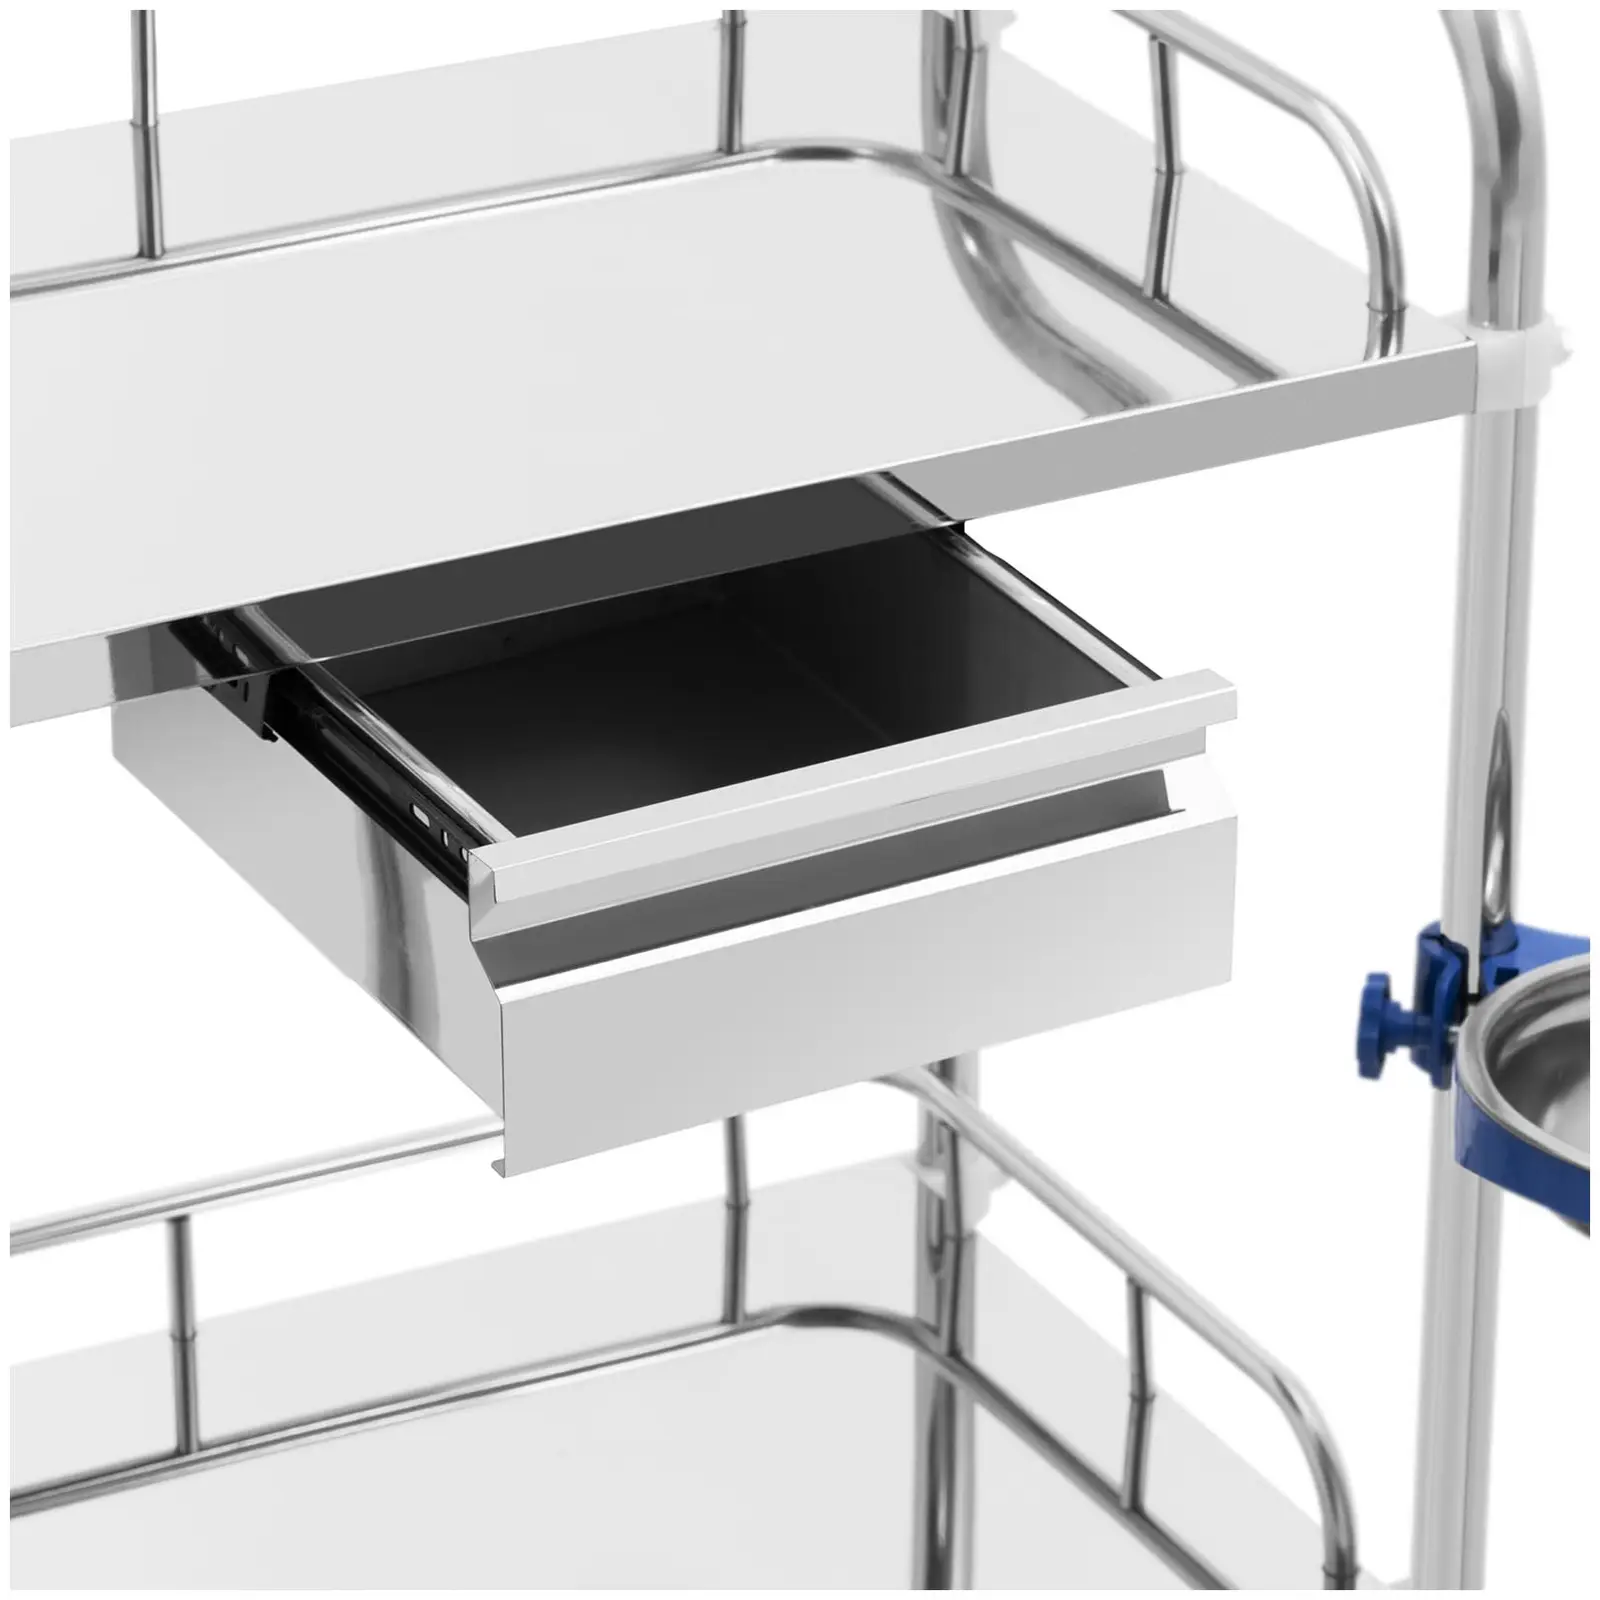 Laboratory Trolley - stainless steel - 2 shelves each 54 x 37 x 13 cm - 1 drawer - 20 kg